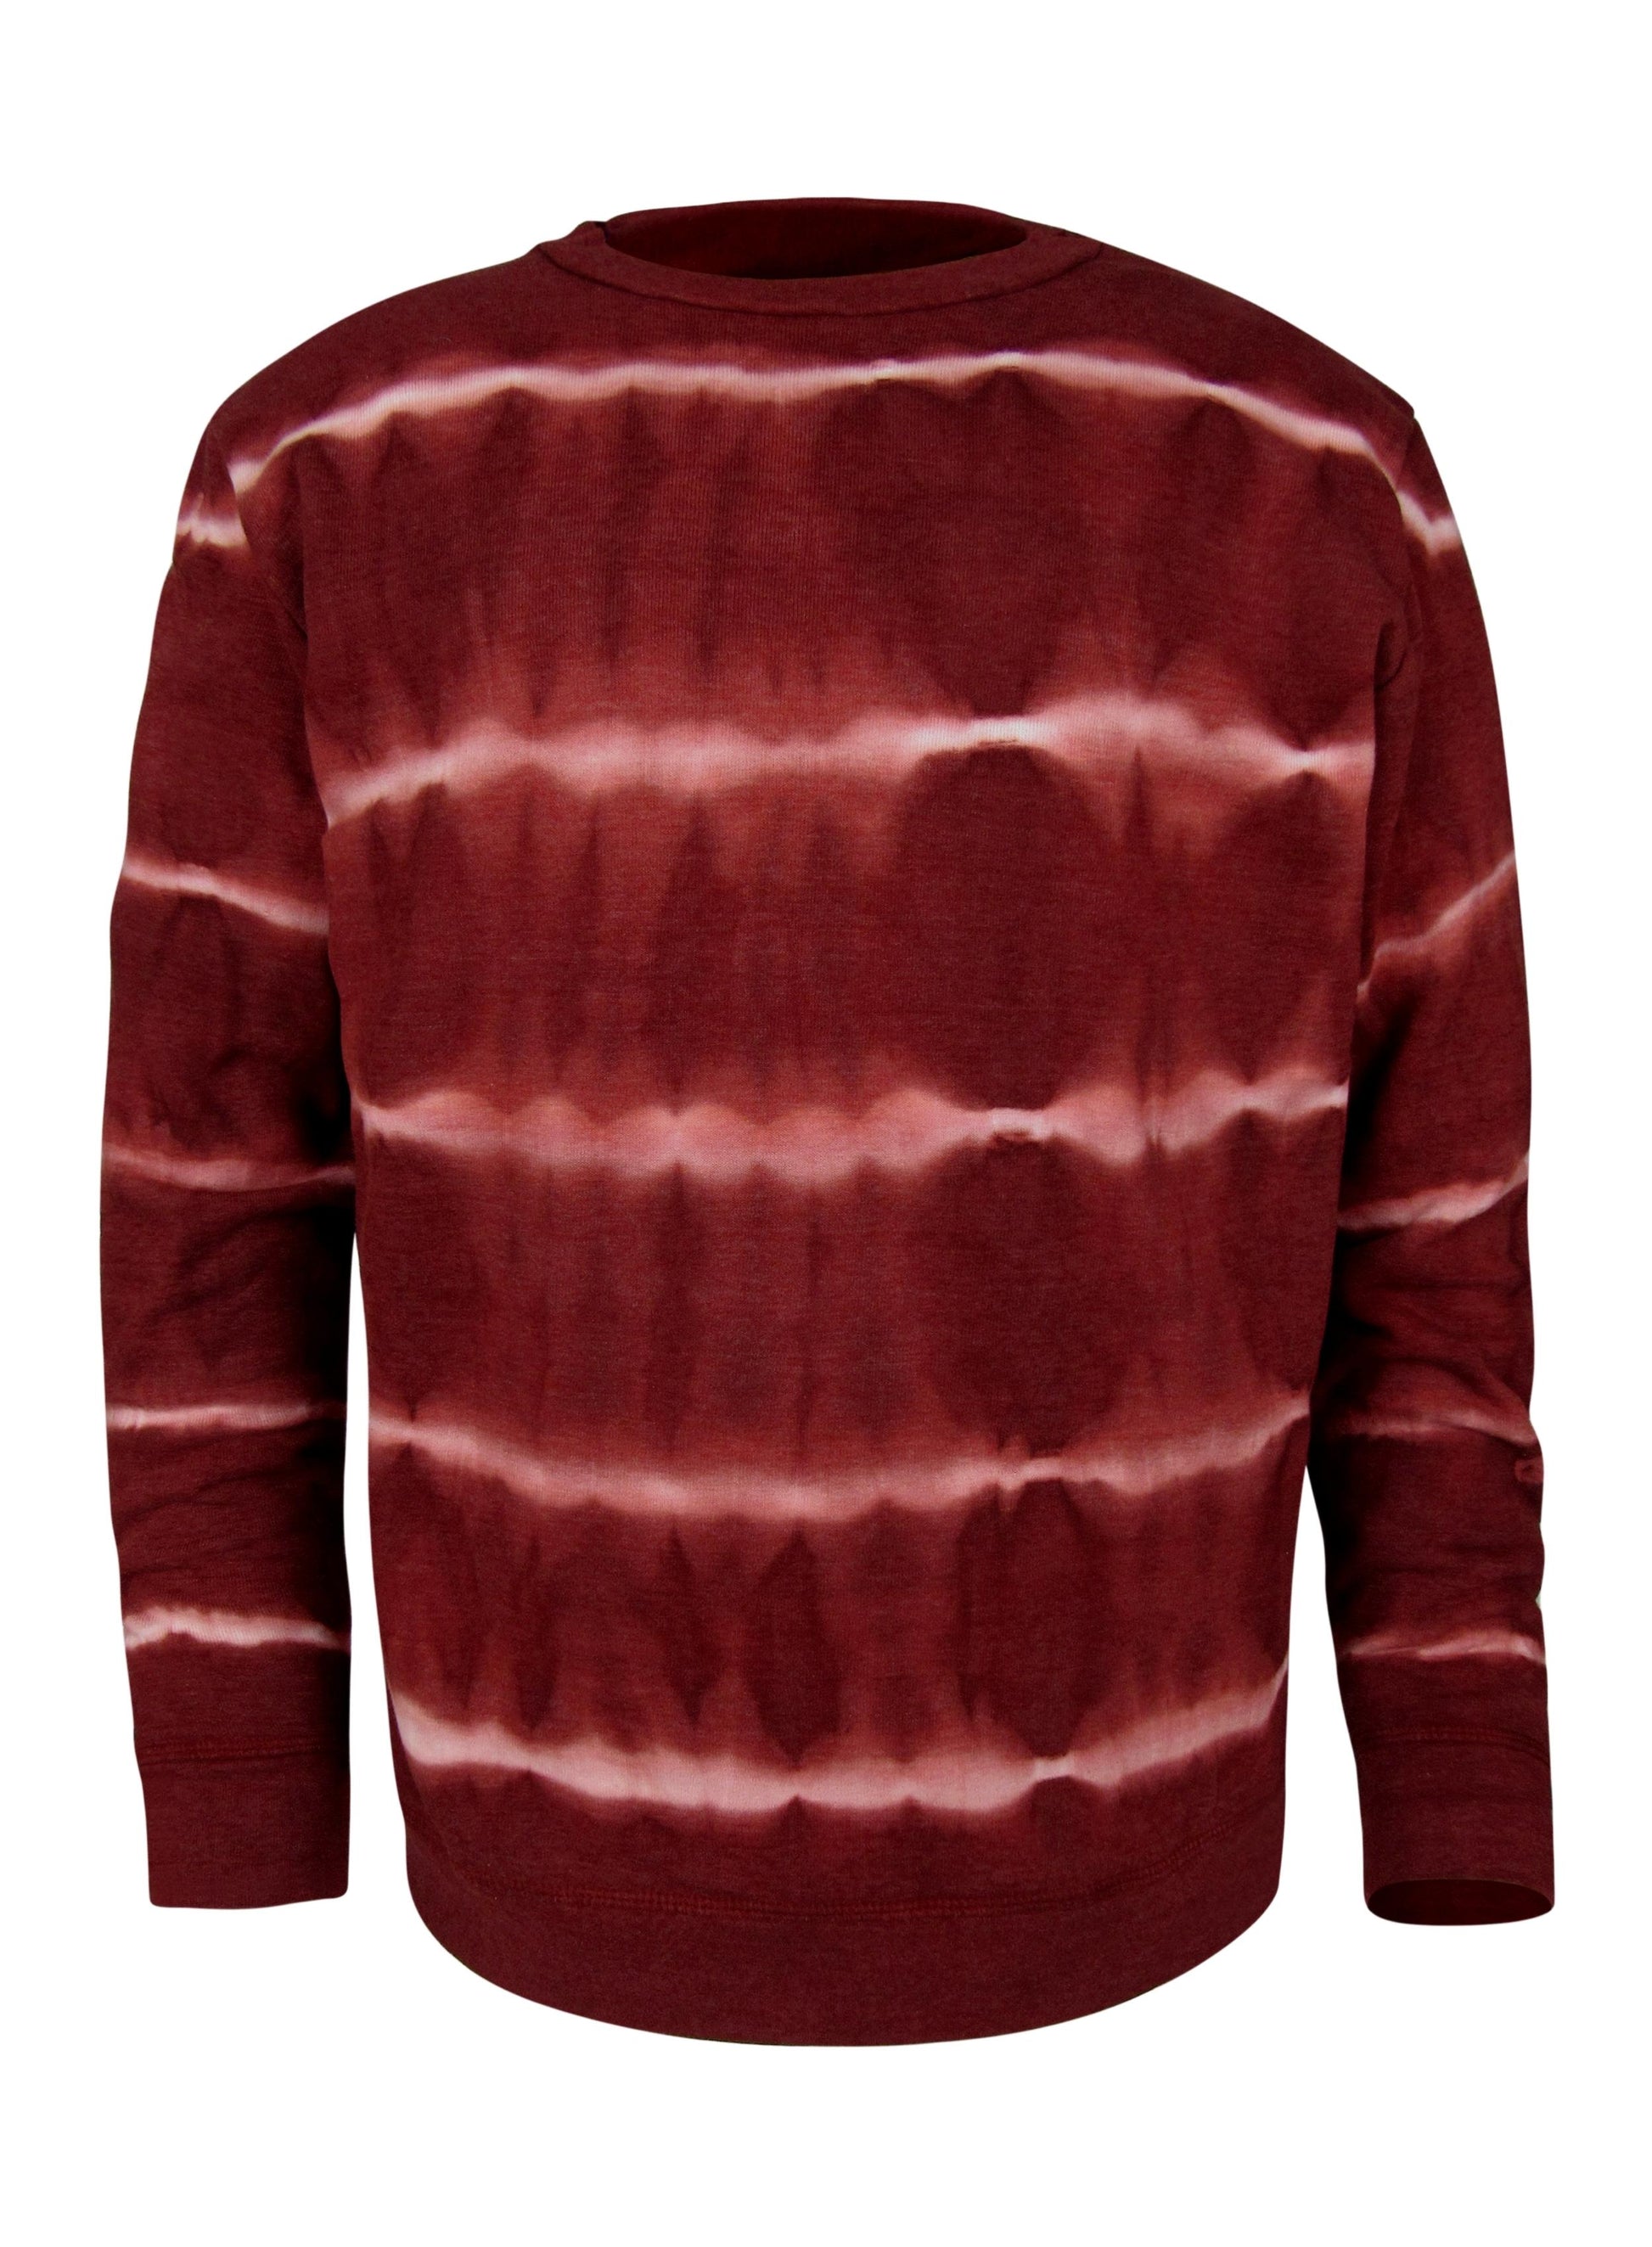 Horizontal Tie Dye Long sleeve crewneck in burgandy and natural by Old El Paso Shirtworks Made in USA